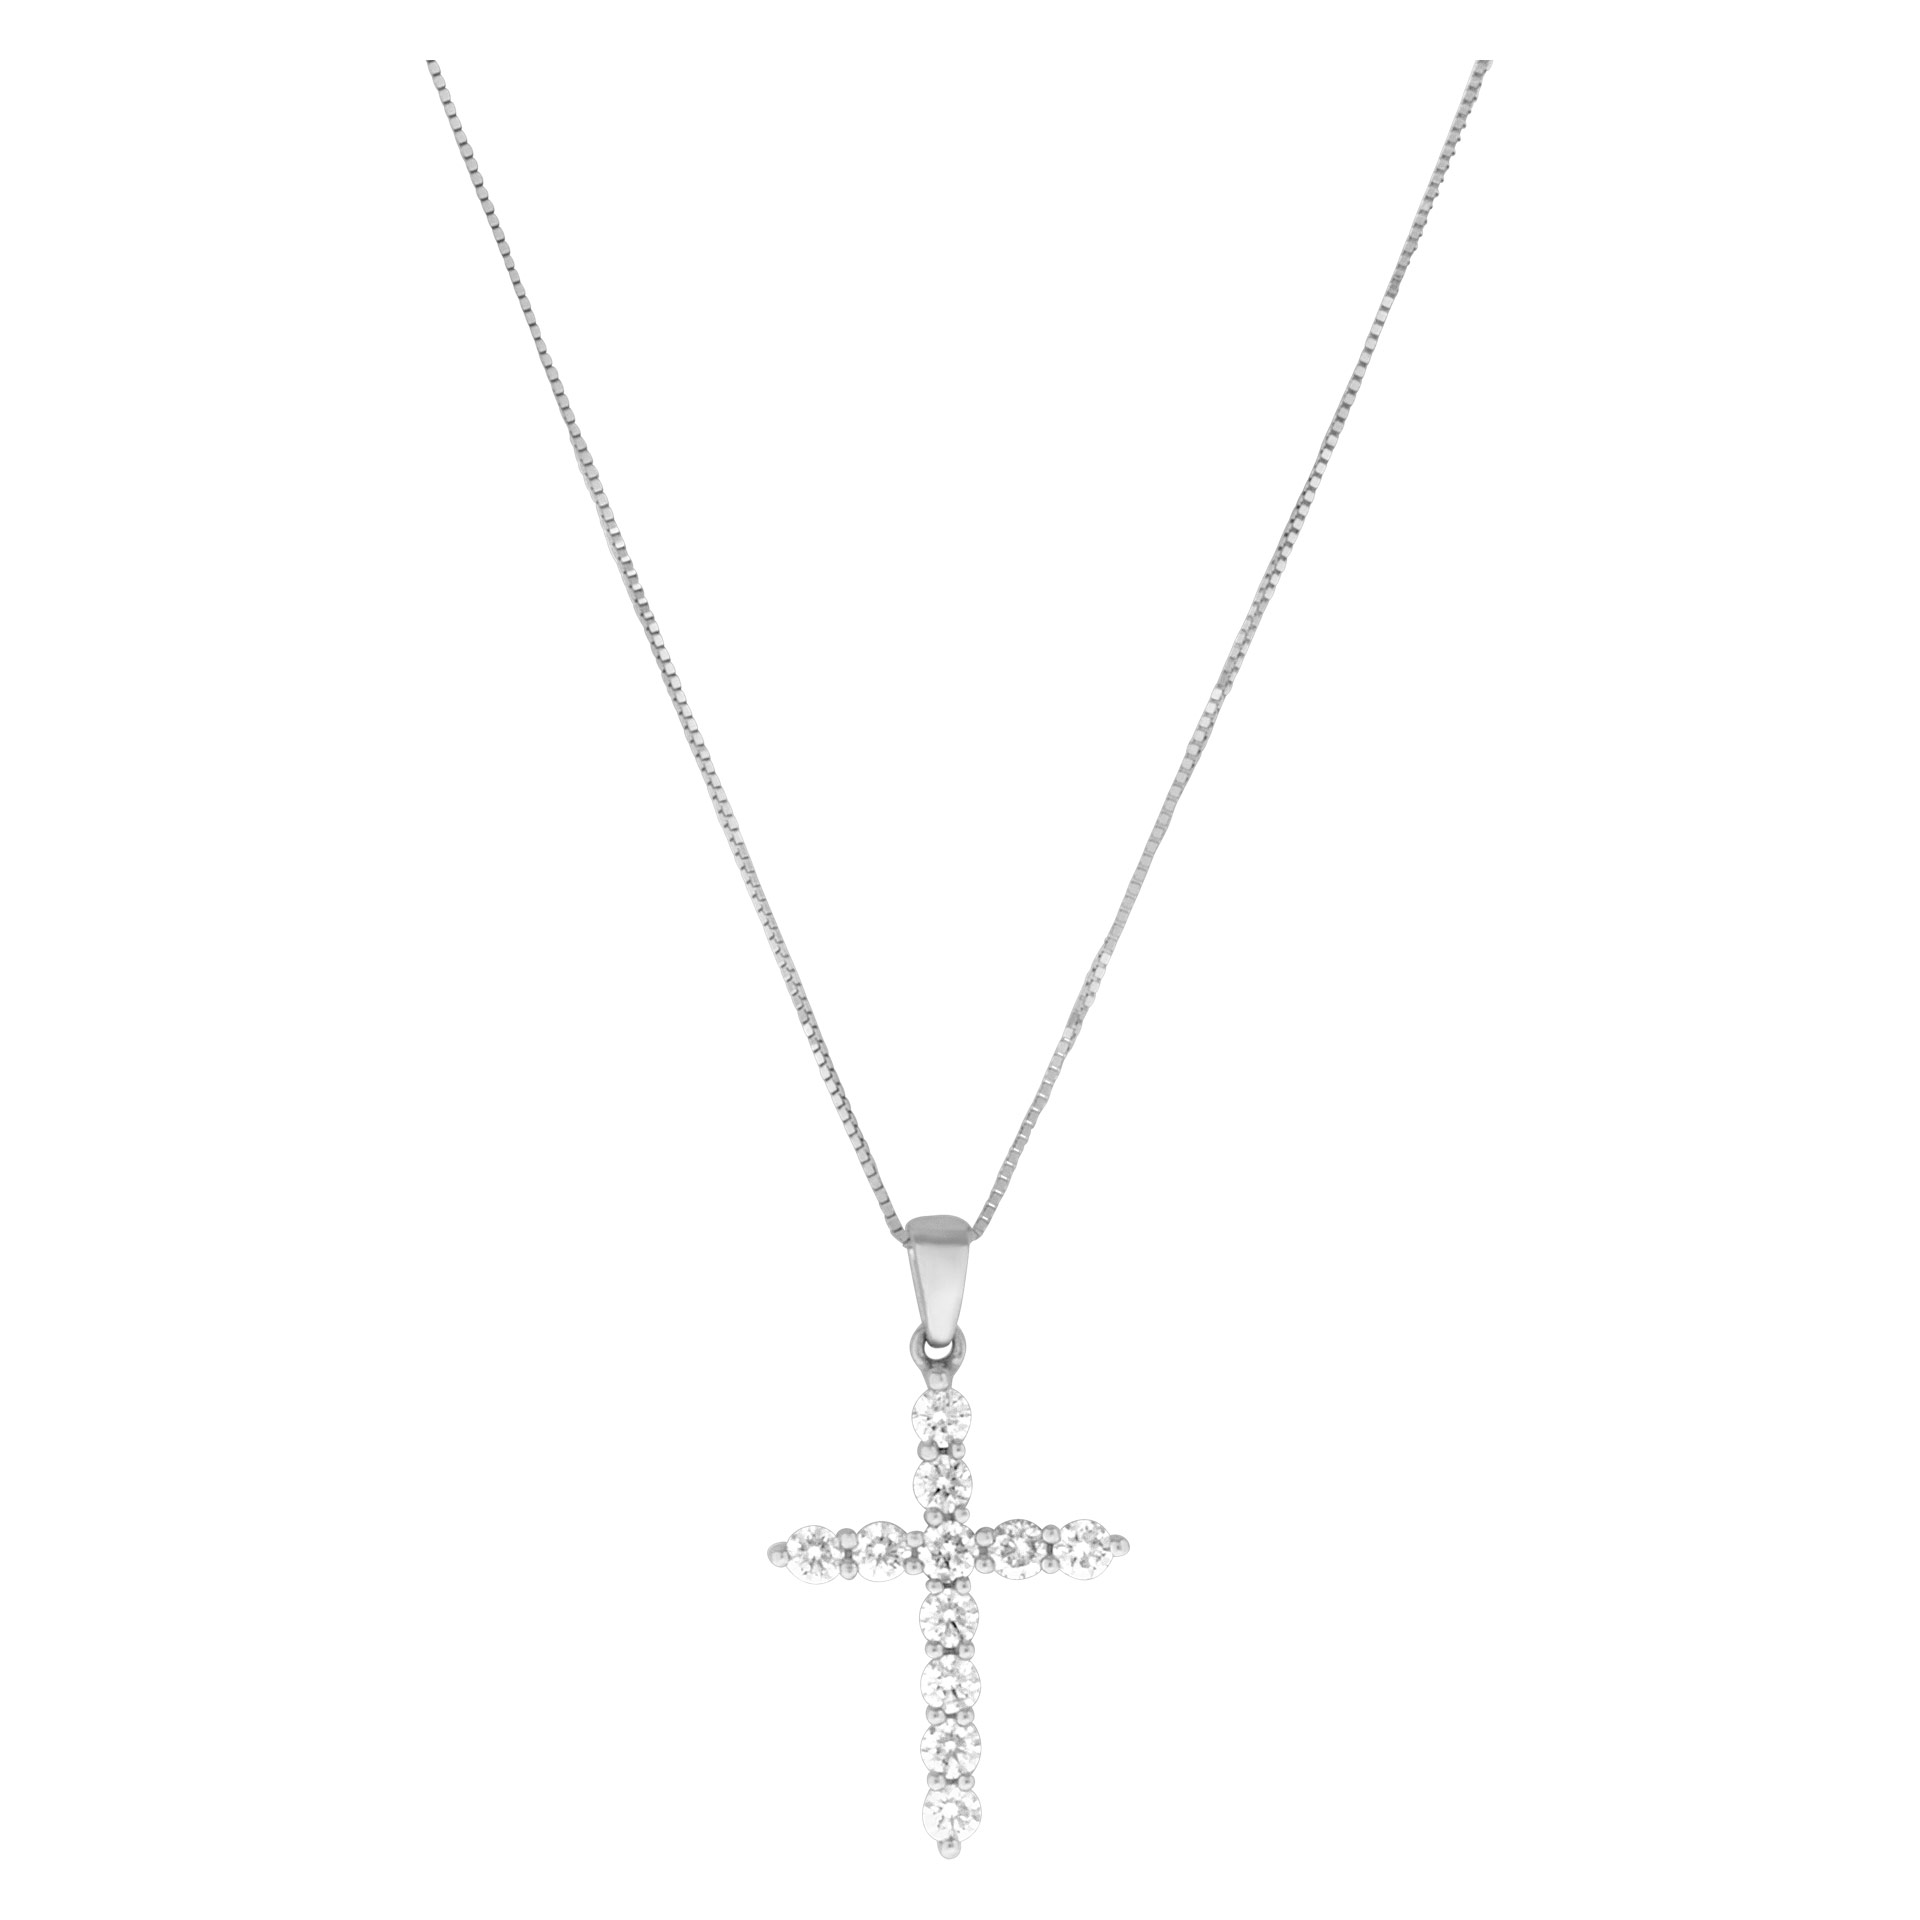 Diamond cross in 18k white gold on thin 18k white gold chain. 0.50 carats image 1